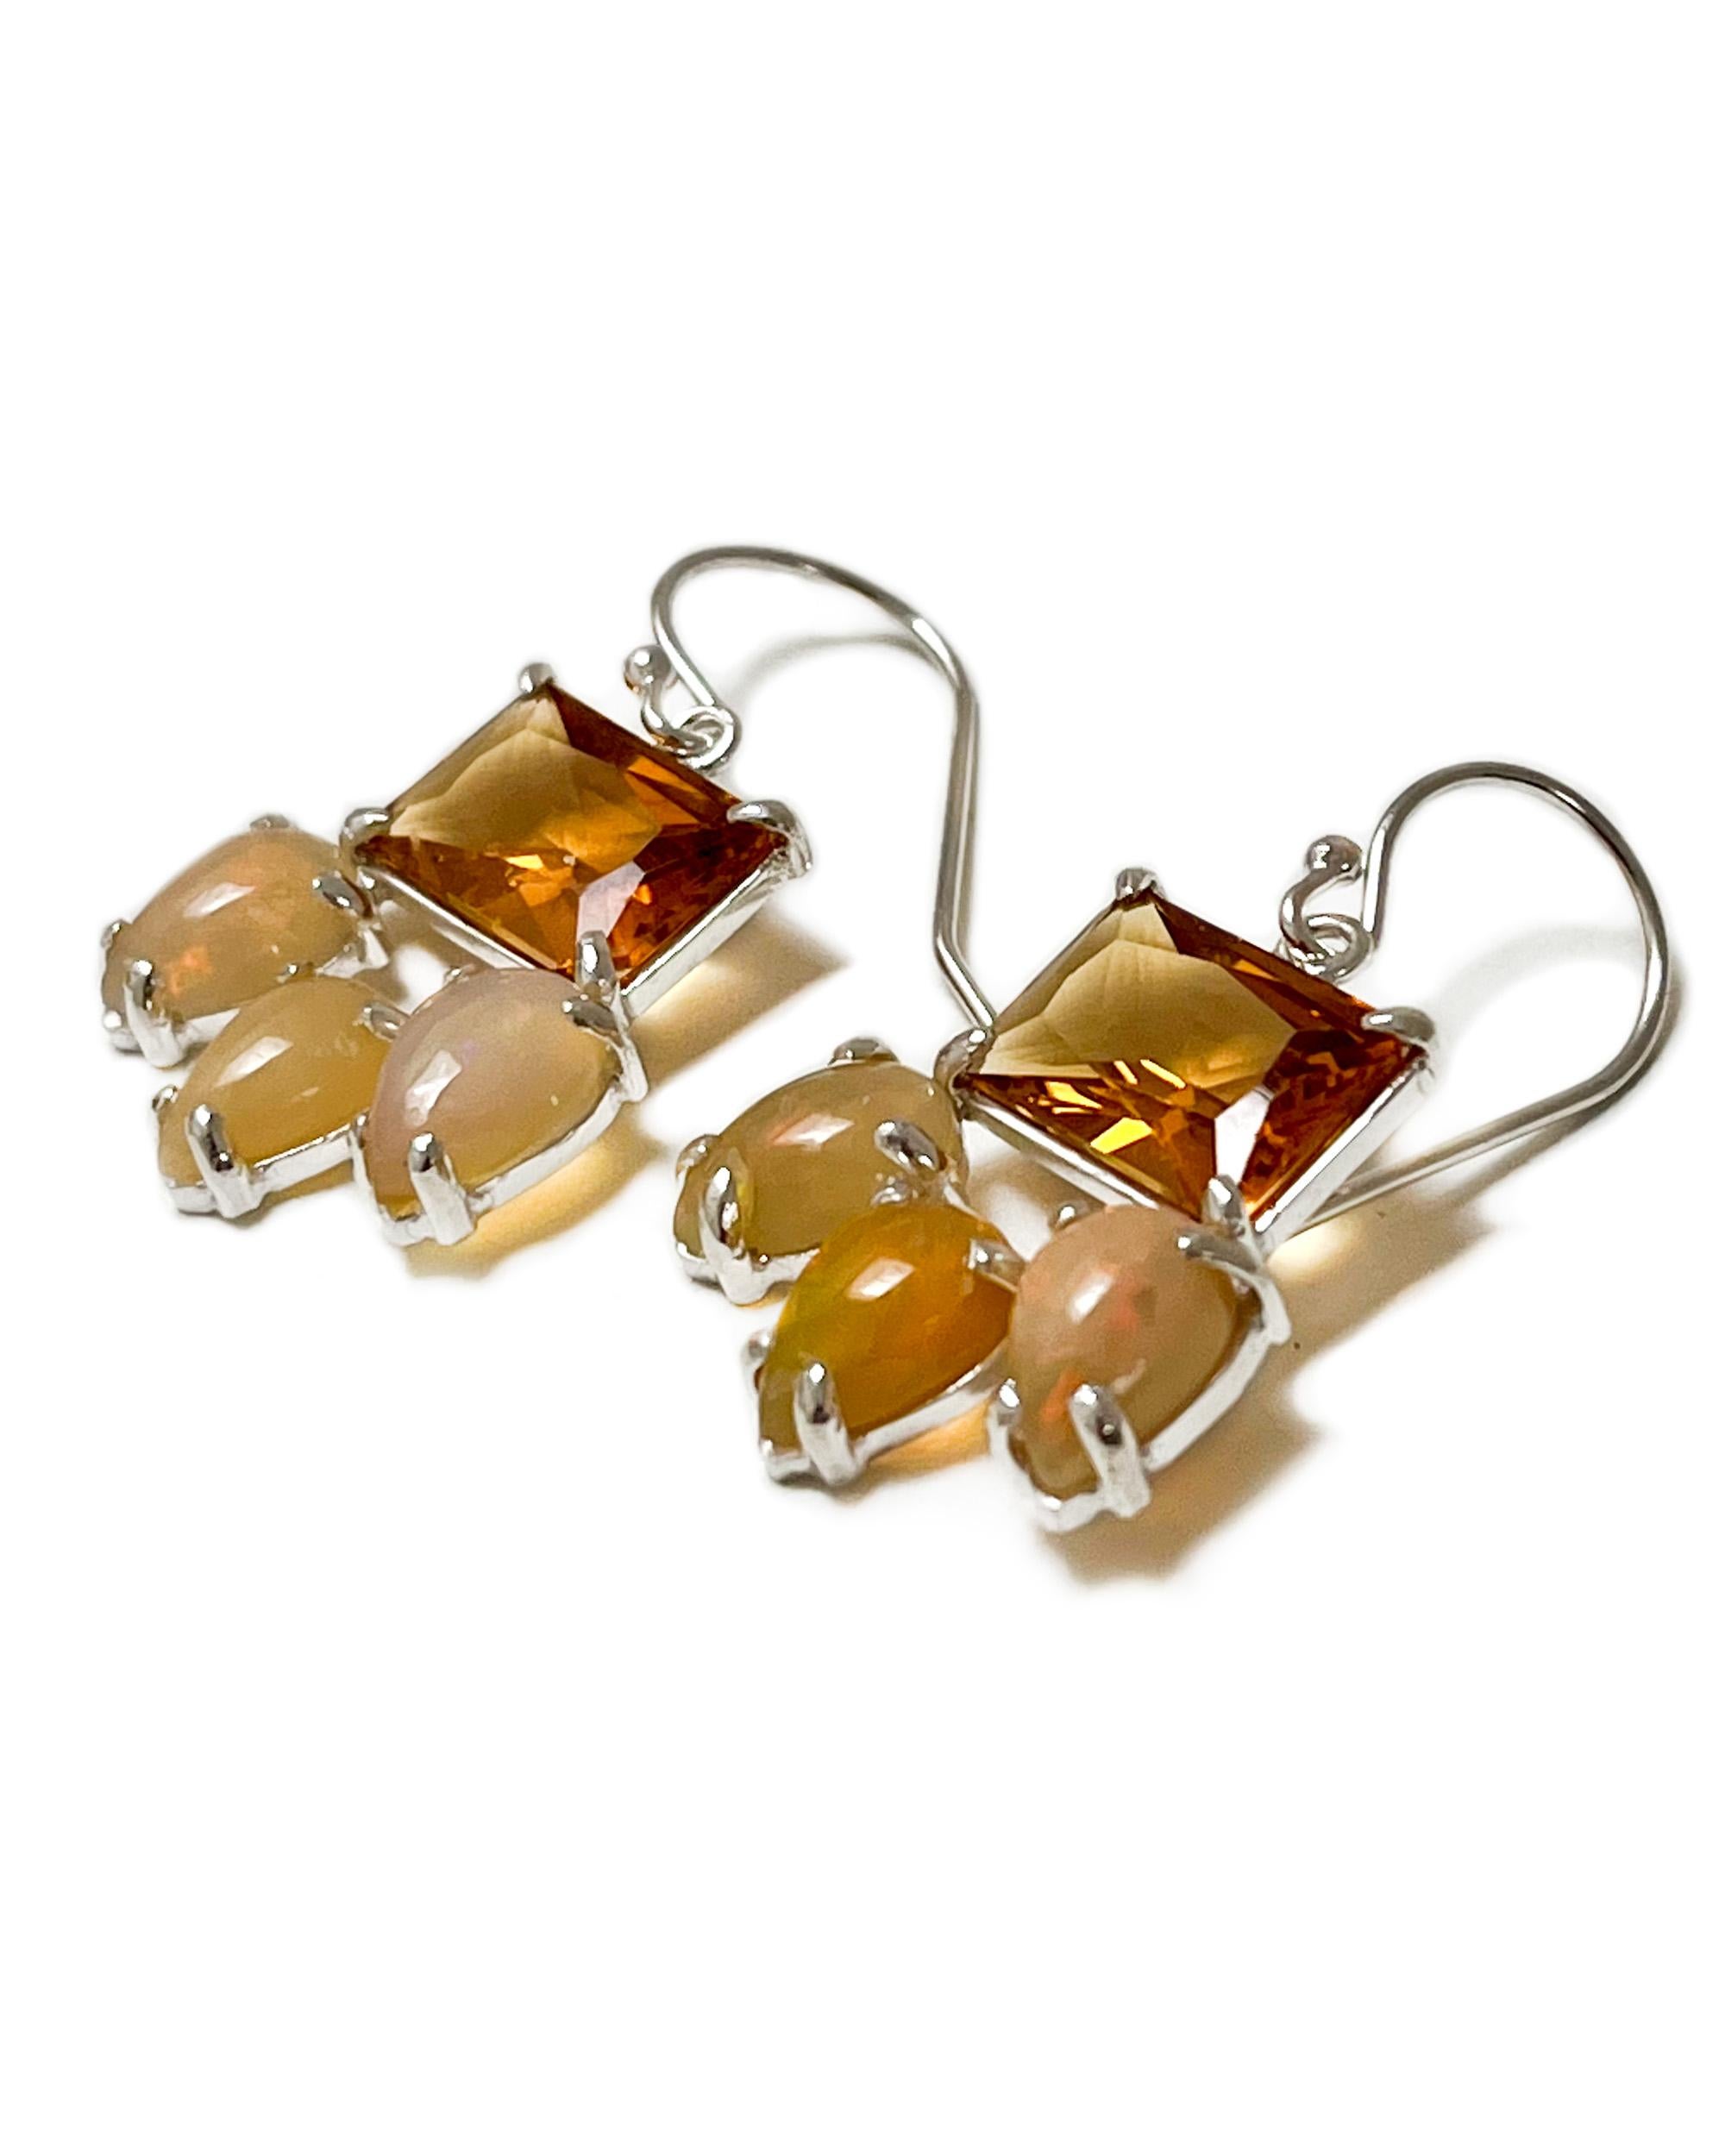 Intention: Pretty Little Thing

Design: Emerald cut orange quartz stabilizes three small, smooth opals on these charming dangle earrings. 

Style Suggestion: ﻿Wear these feminine earrings with something frilly, or pair with more orange accents.